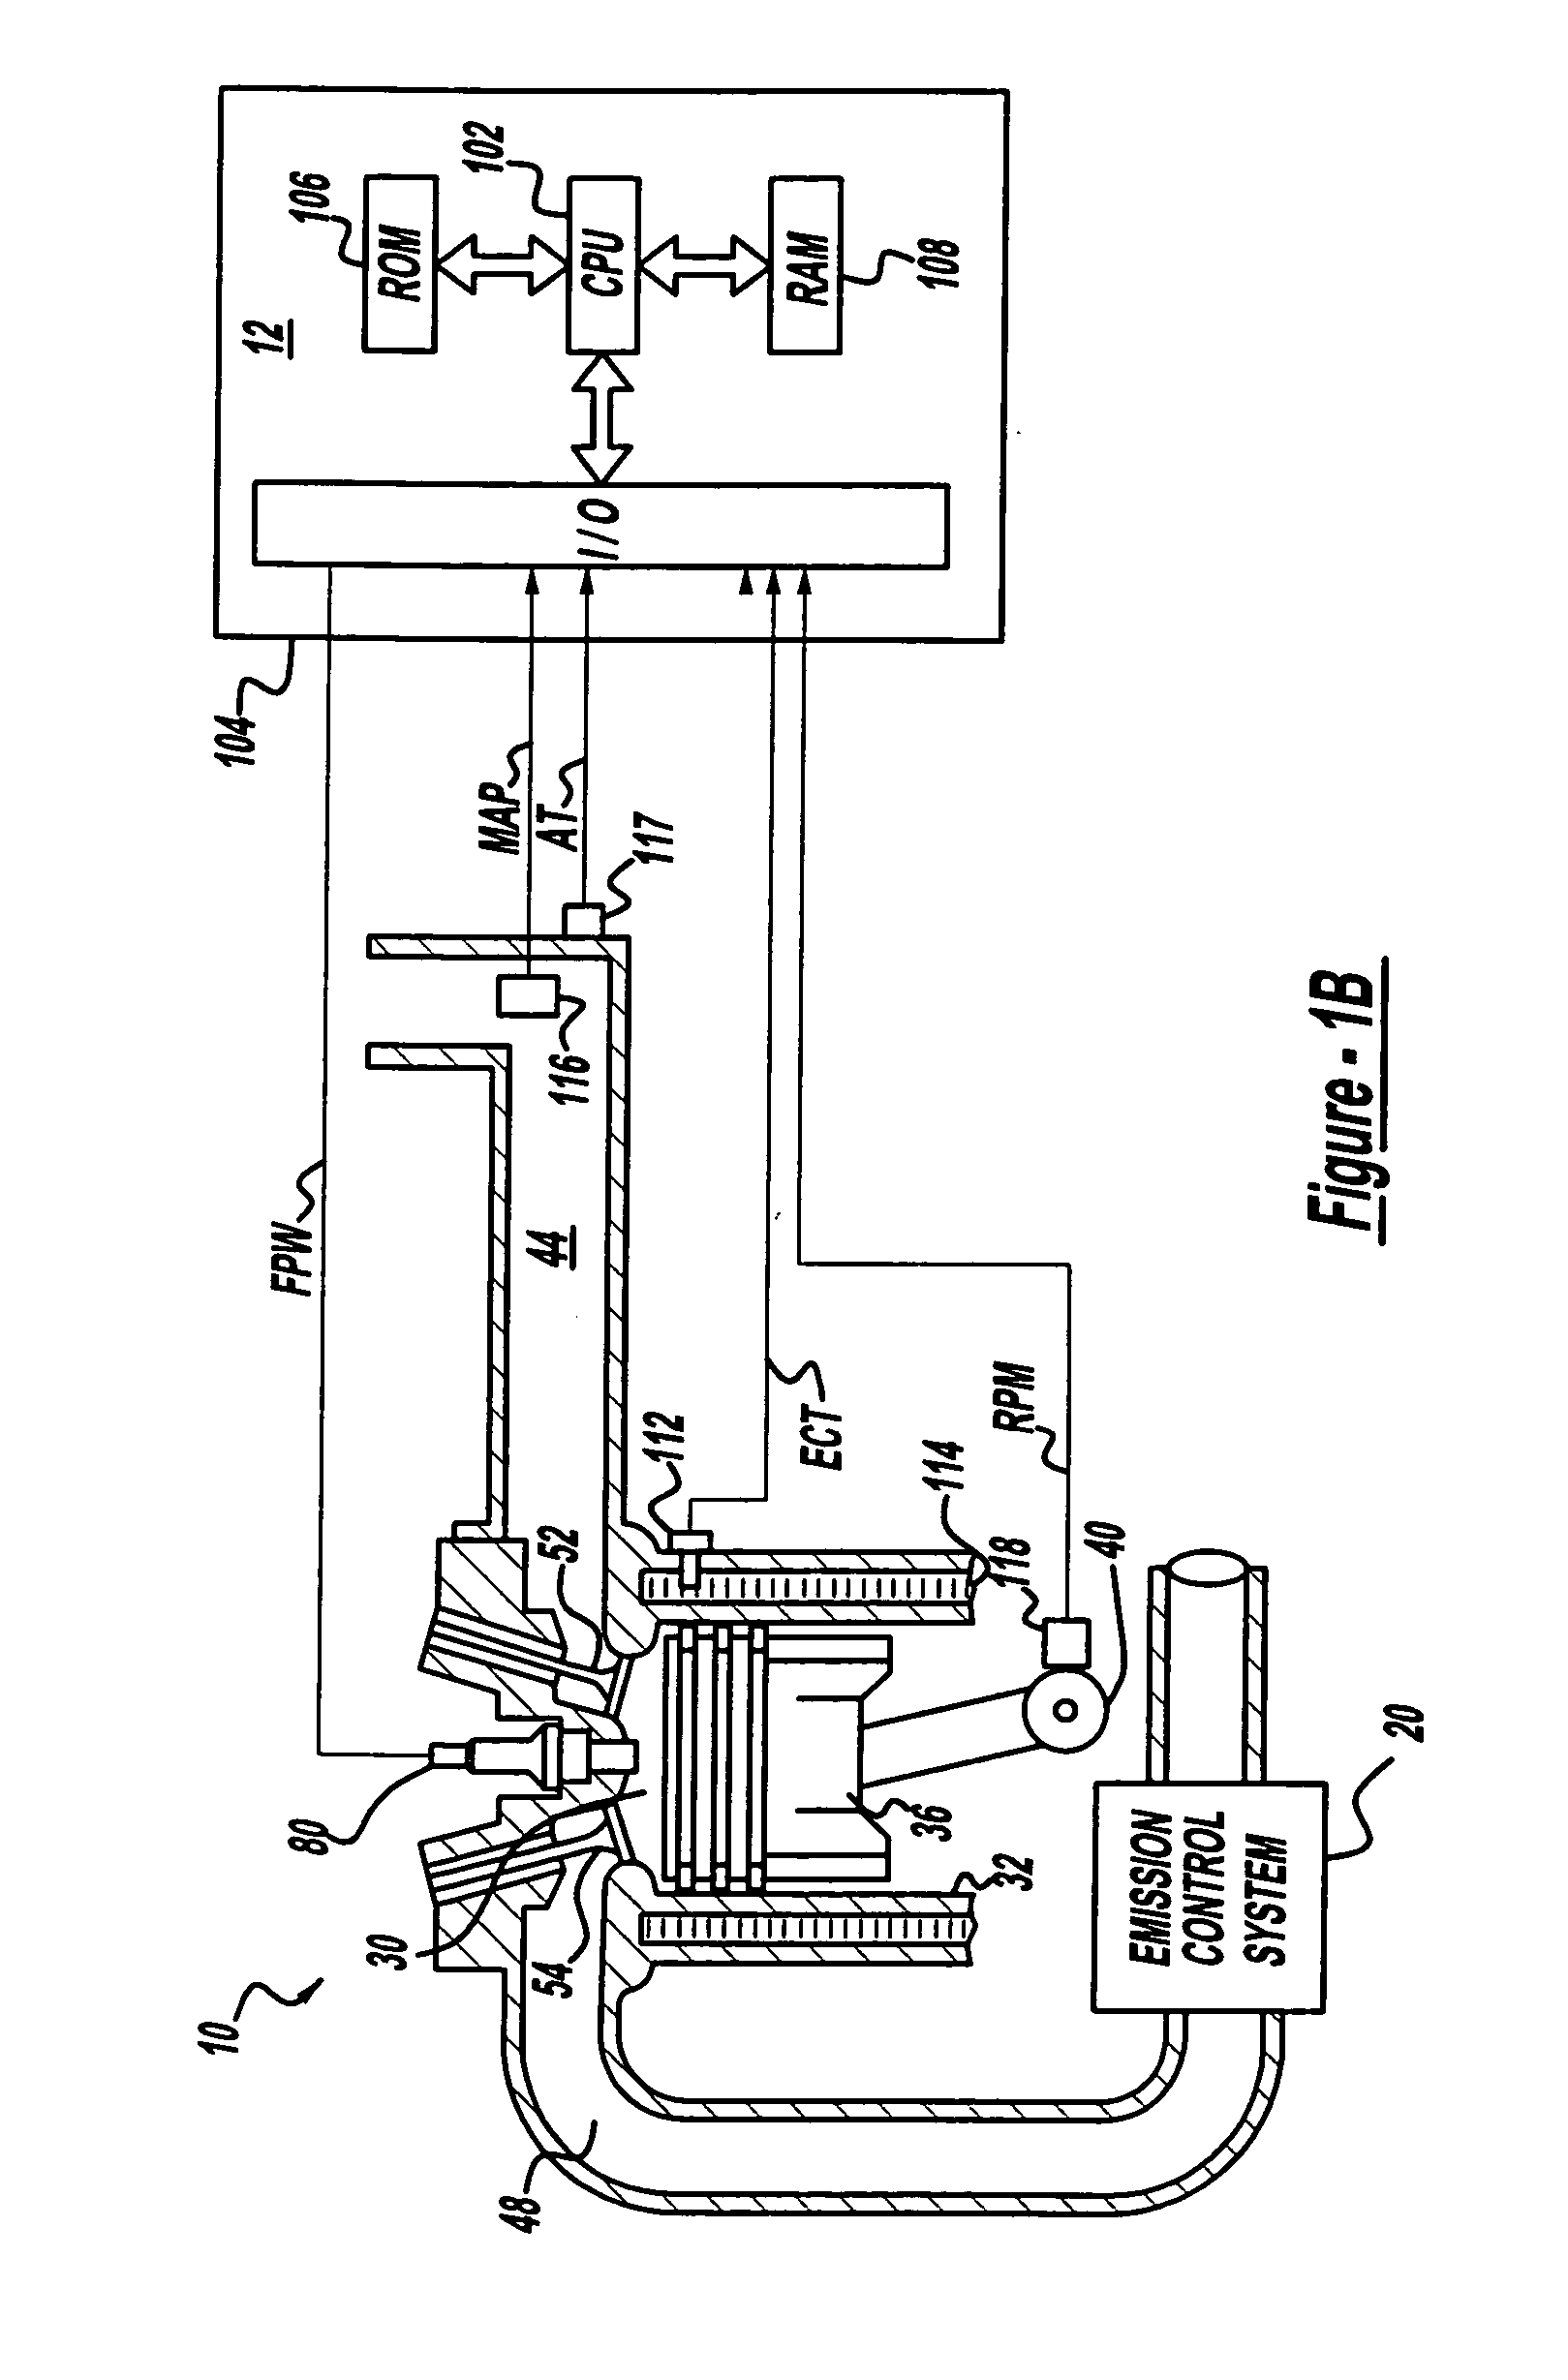 Diagnosis of a urea scr catalytic system